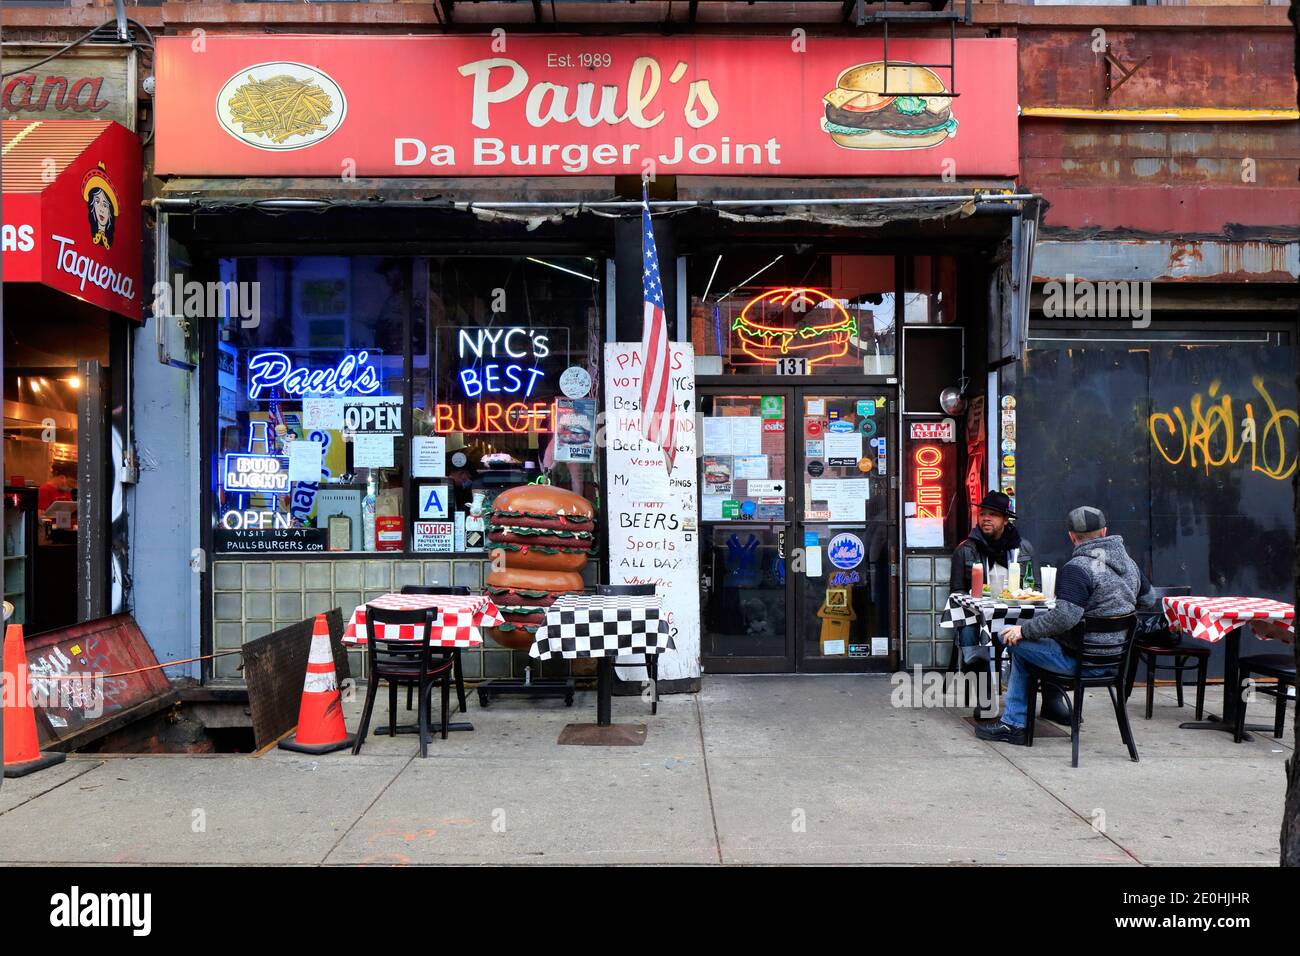 Paul's Da Burger Joint, 131 Second Ave, New York, NYC storefront photo of a hamburger restaurant in Manhattan's East Village, St. Mark's Place. Stock Photo